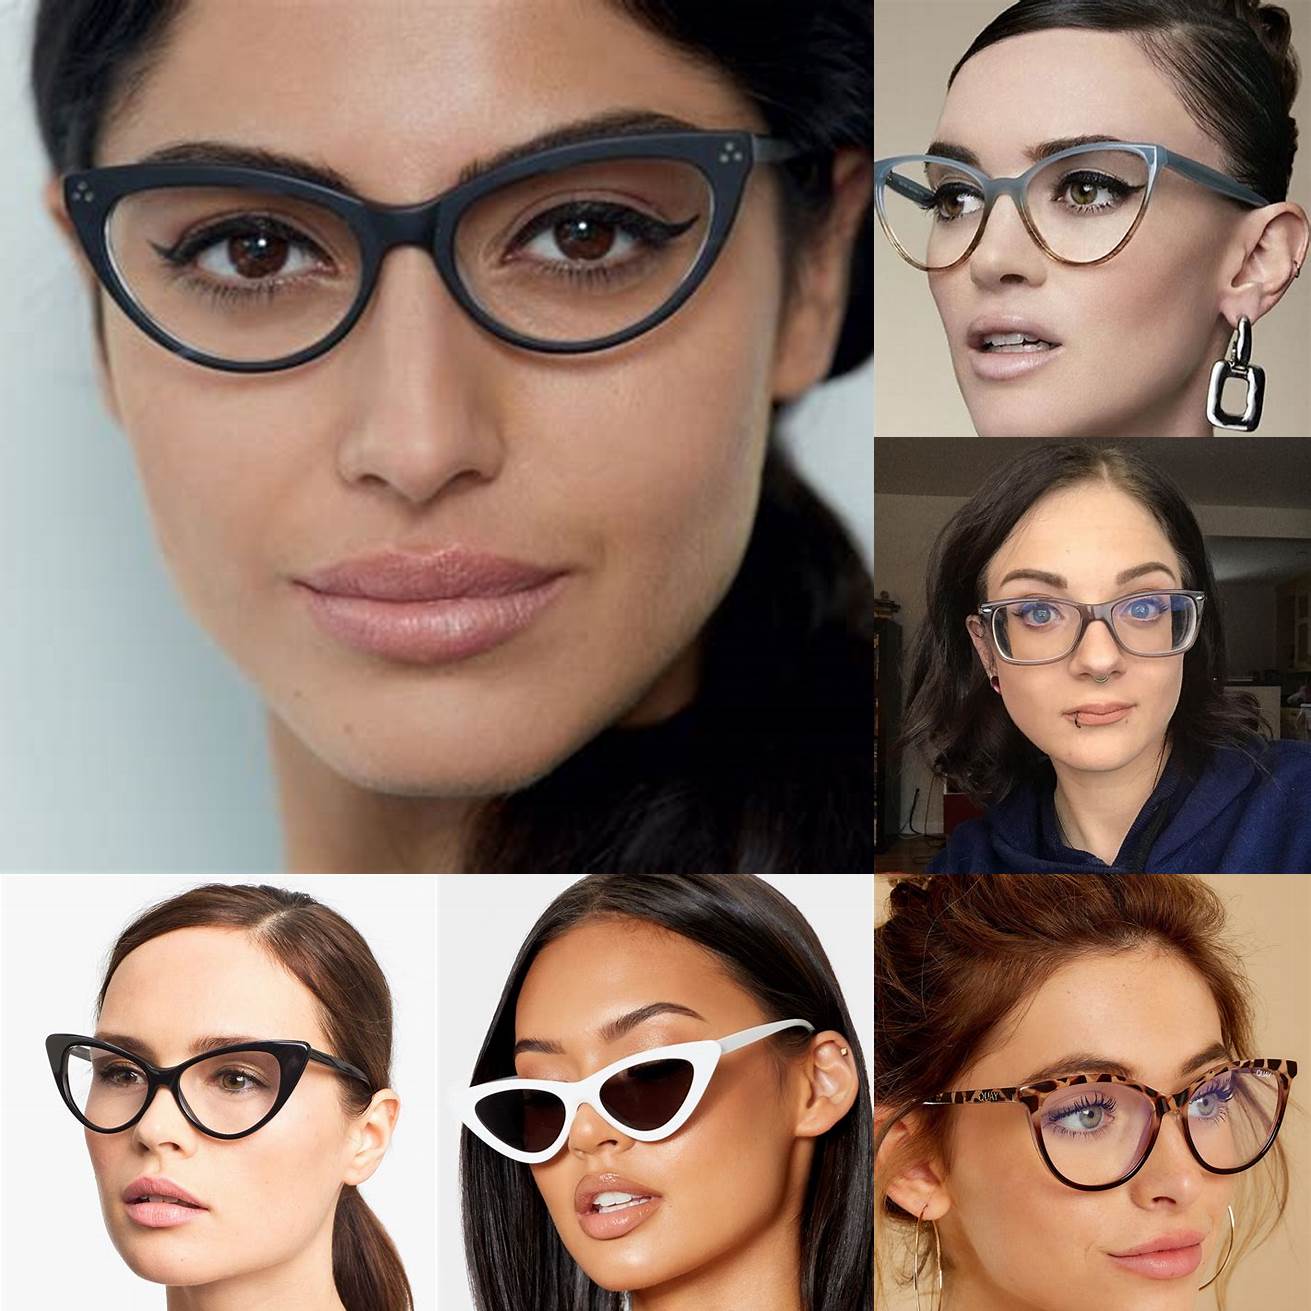 Q Can I wear cat eye glasses with earrings